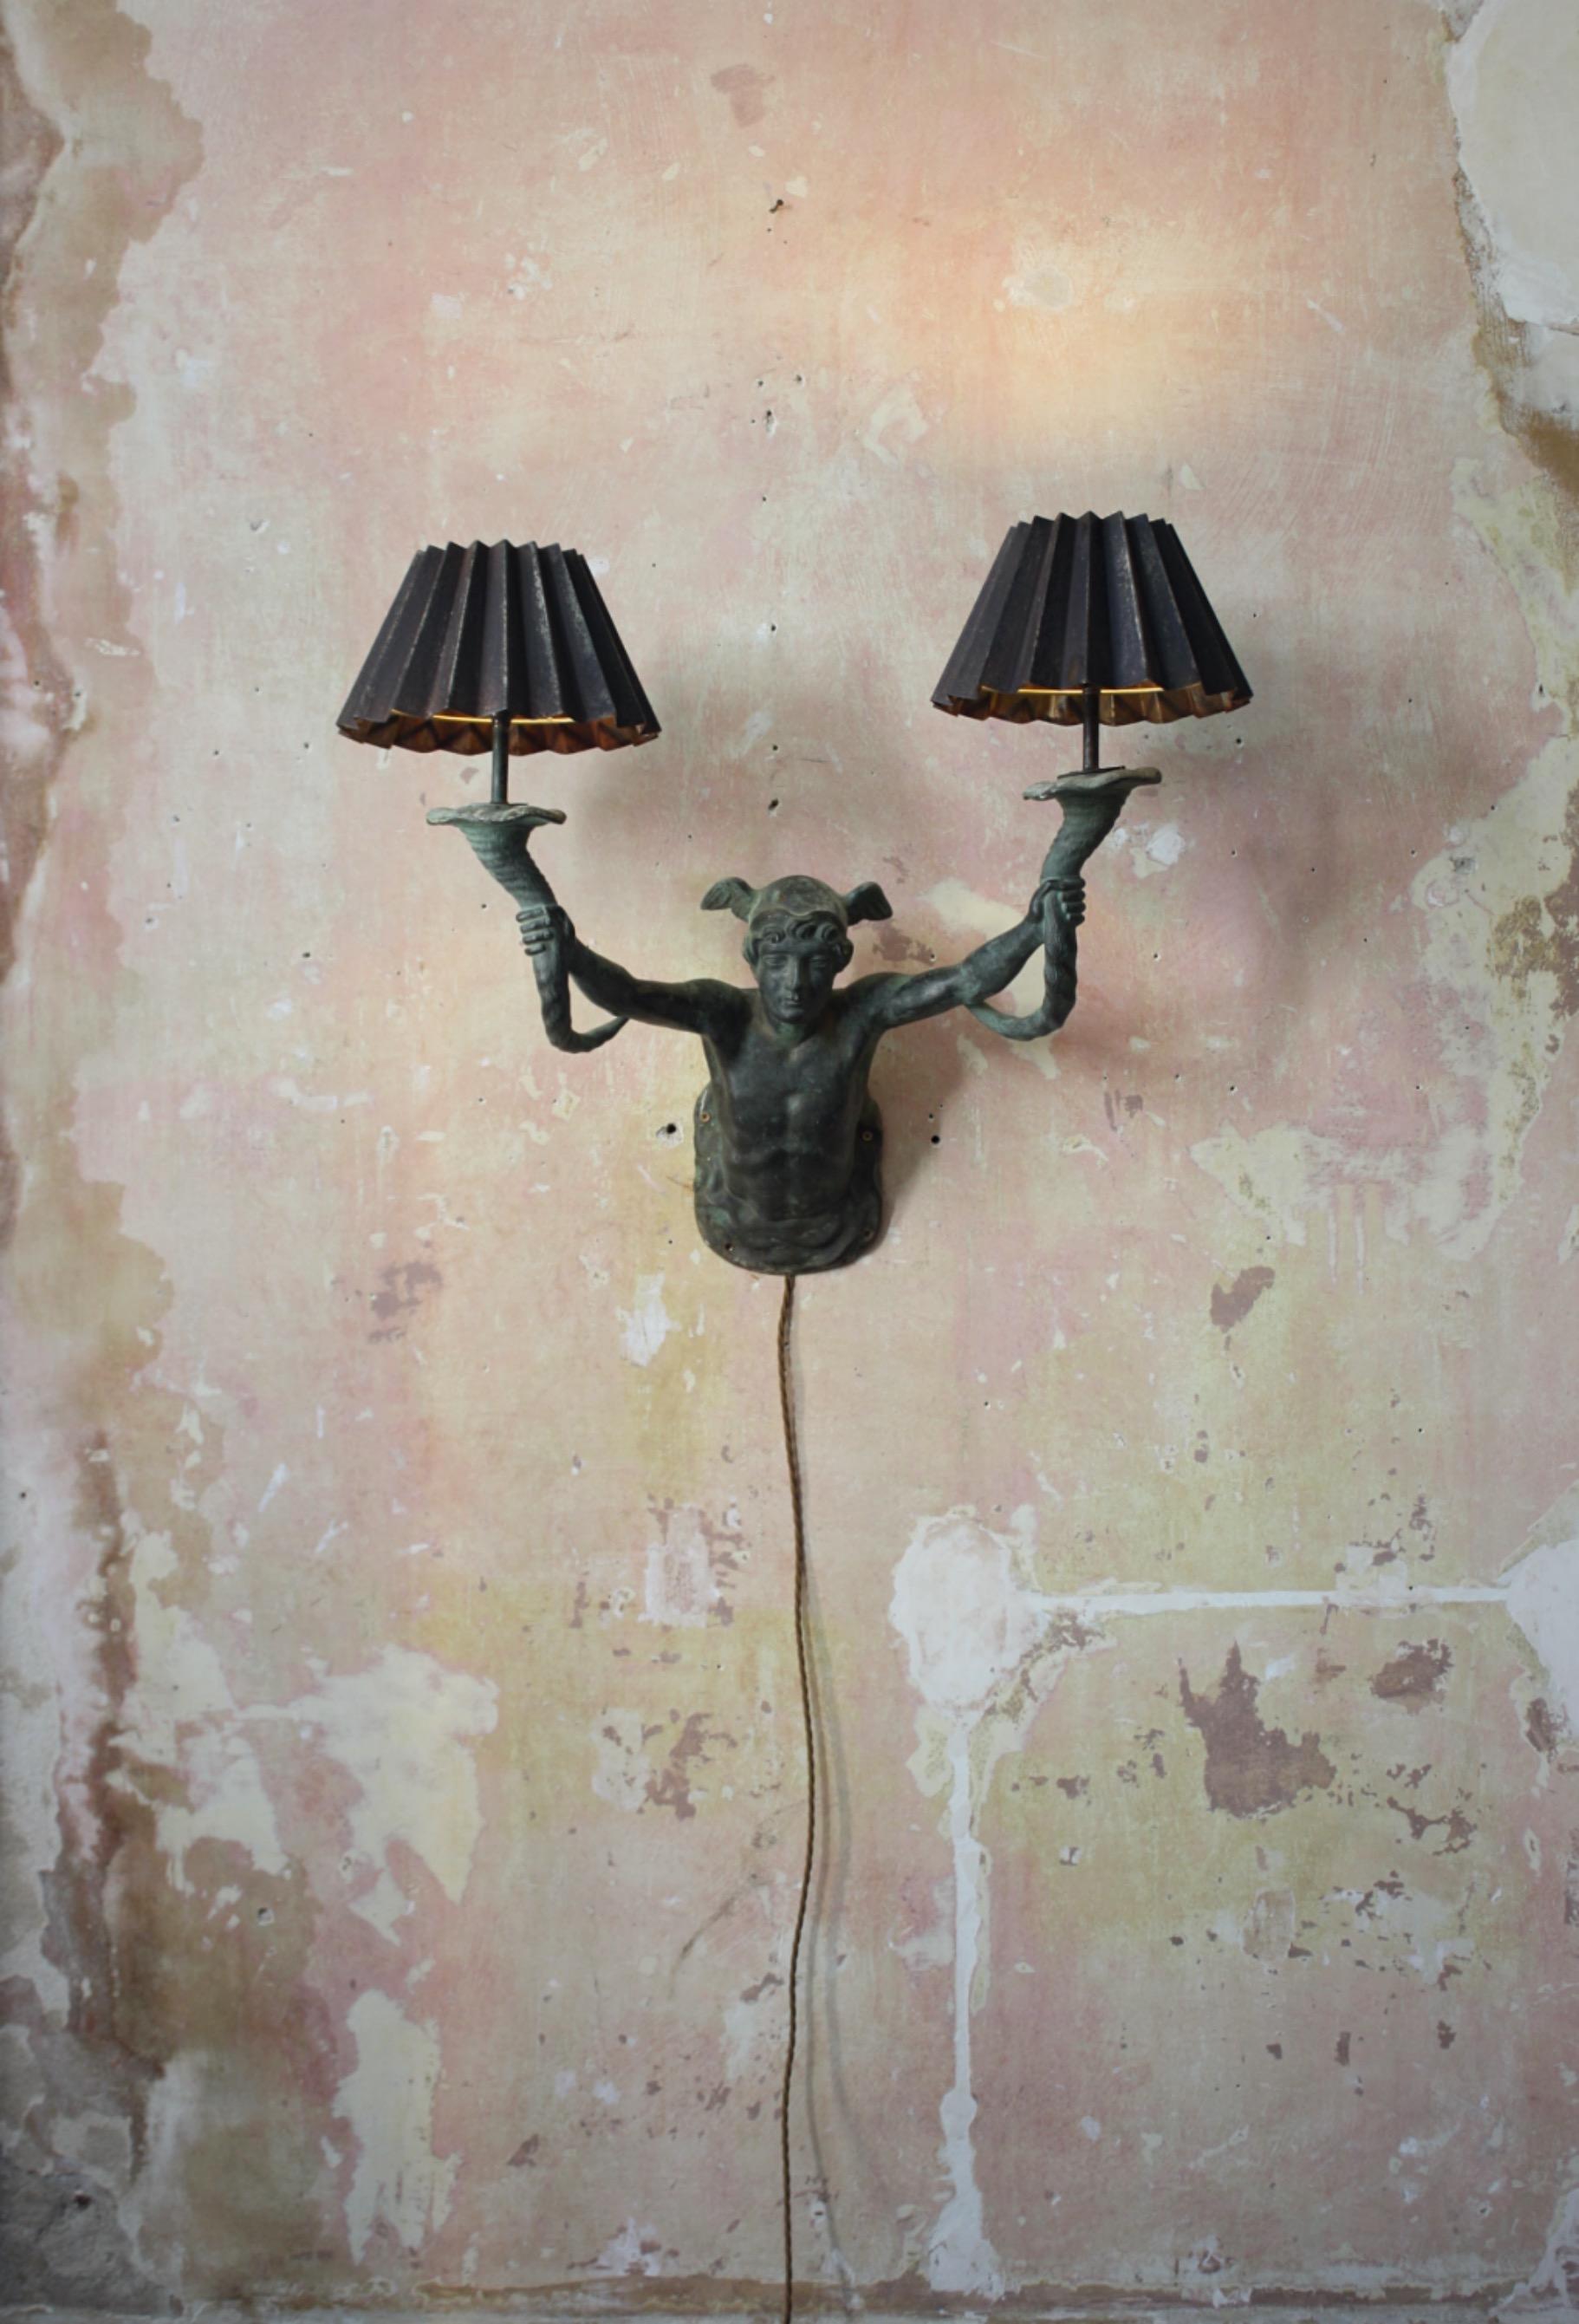 A mid to late 19th century French gas wall light, cast bronze depicting a well modelled Mercury holding aloft a pair of cornucopias.

Later rewired for electric, with pleated iron shades. Originaly used as a exterior light, with a wonderful